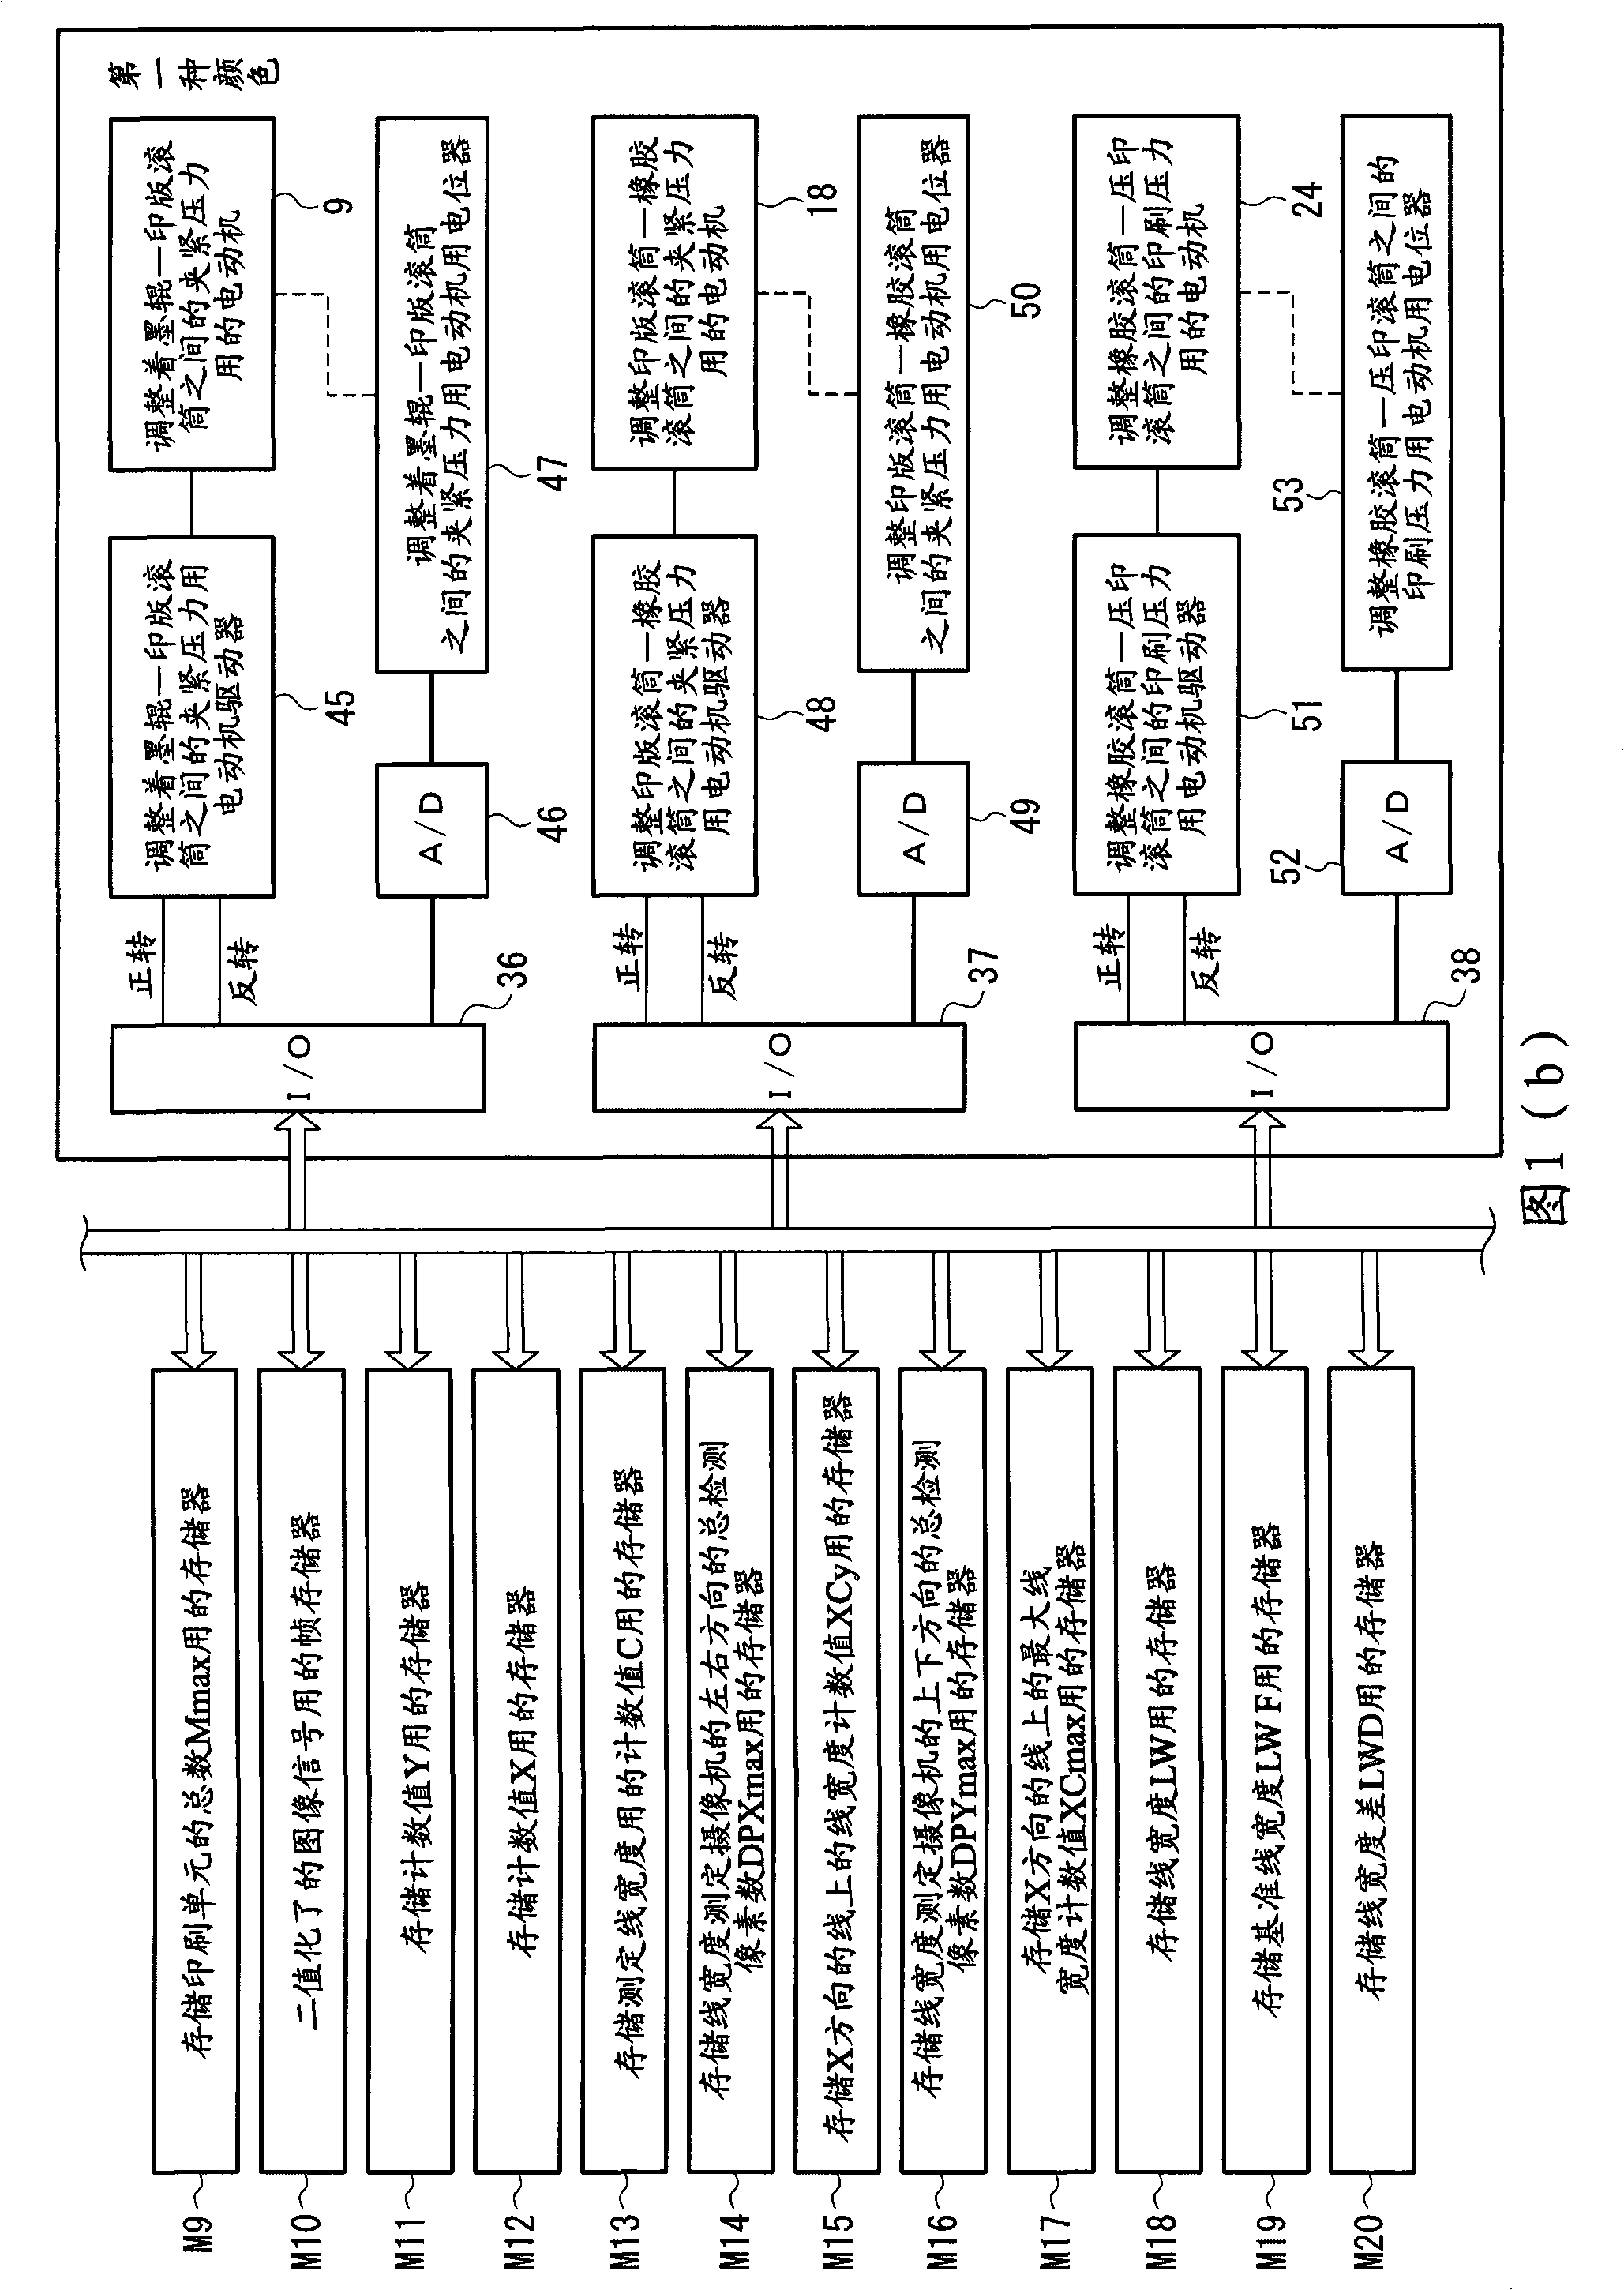 Printing quality control method and system for relief printing press